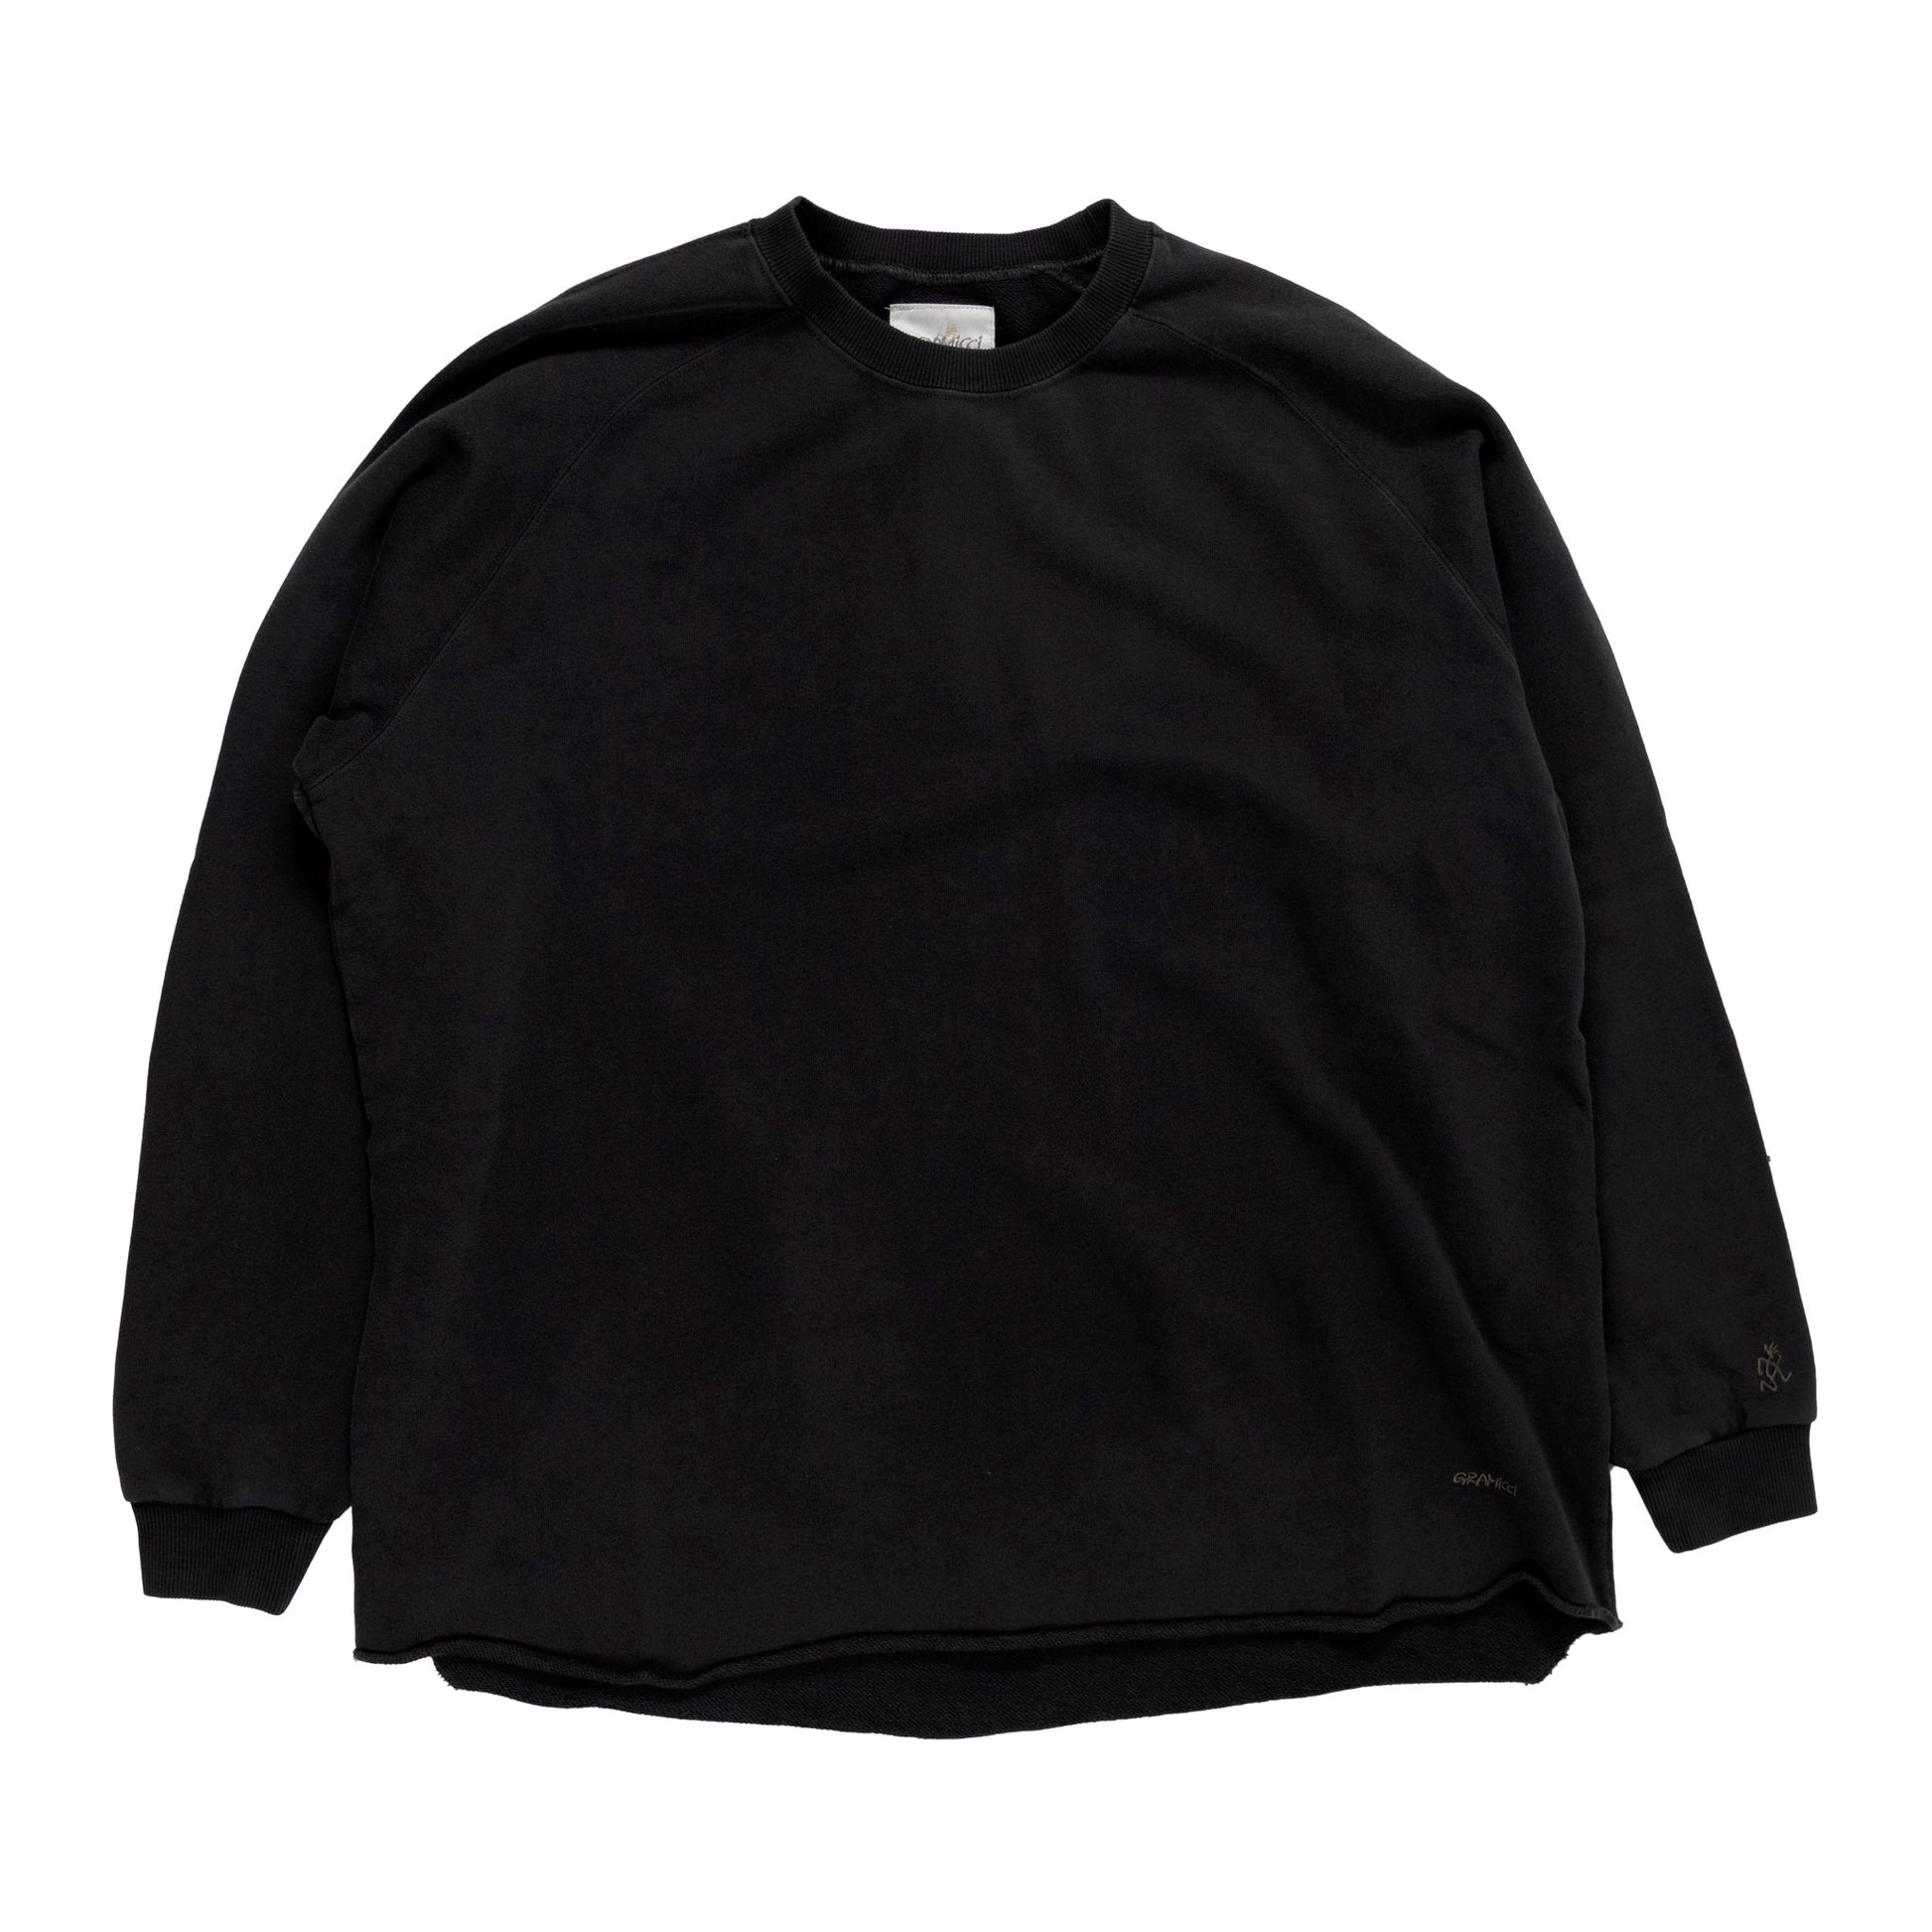 Gramicci Talecut Sweatshirt in Deep Ink sweater all weather outer wear front